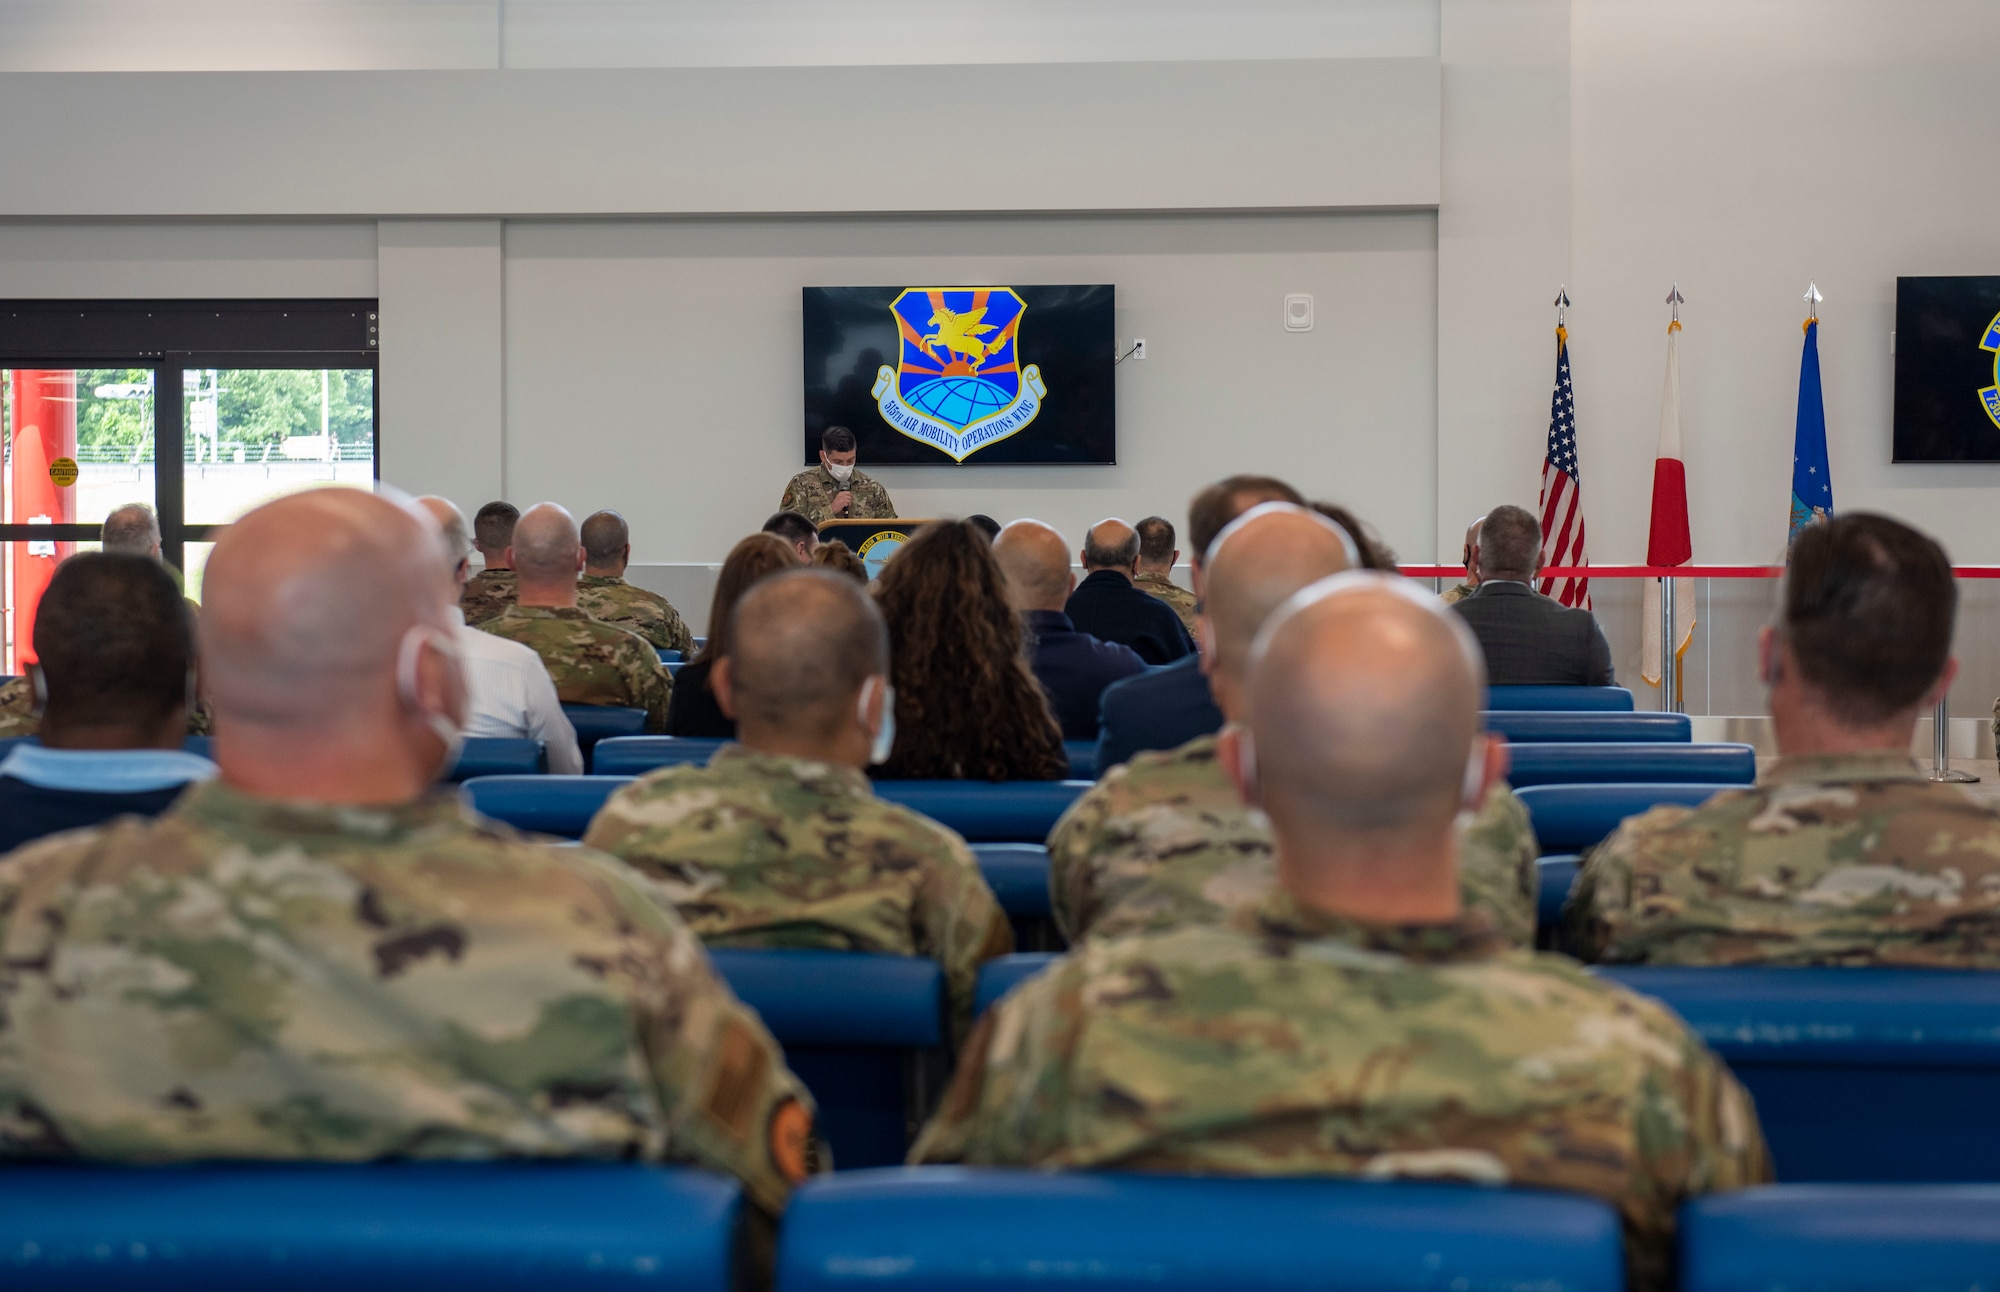 The Yokota Air Base community celebrated the opening of a new Air Mobility Command passenger terminal on Monday, June 13.